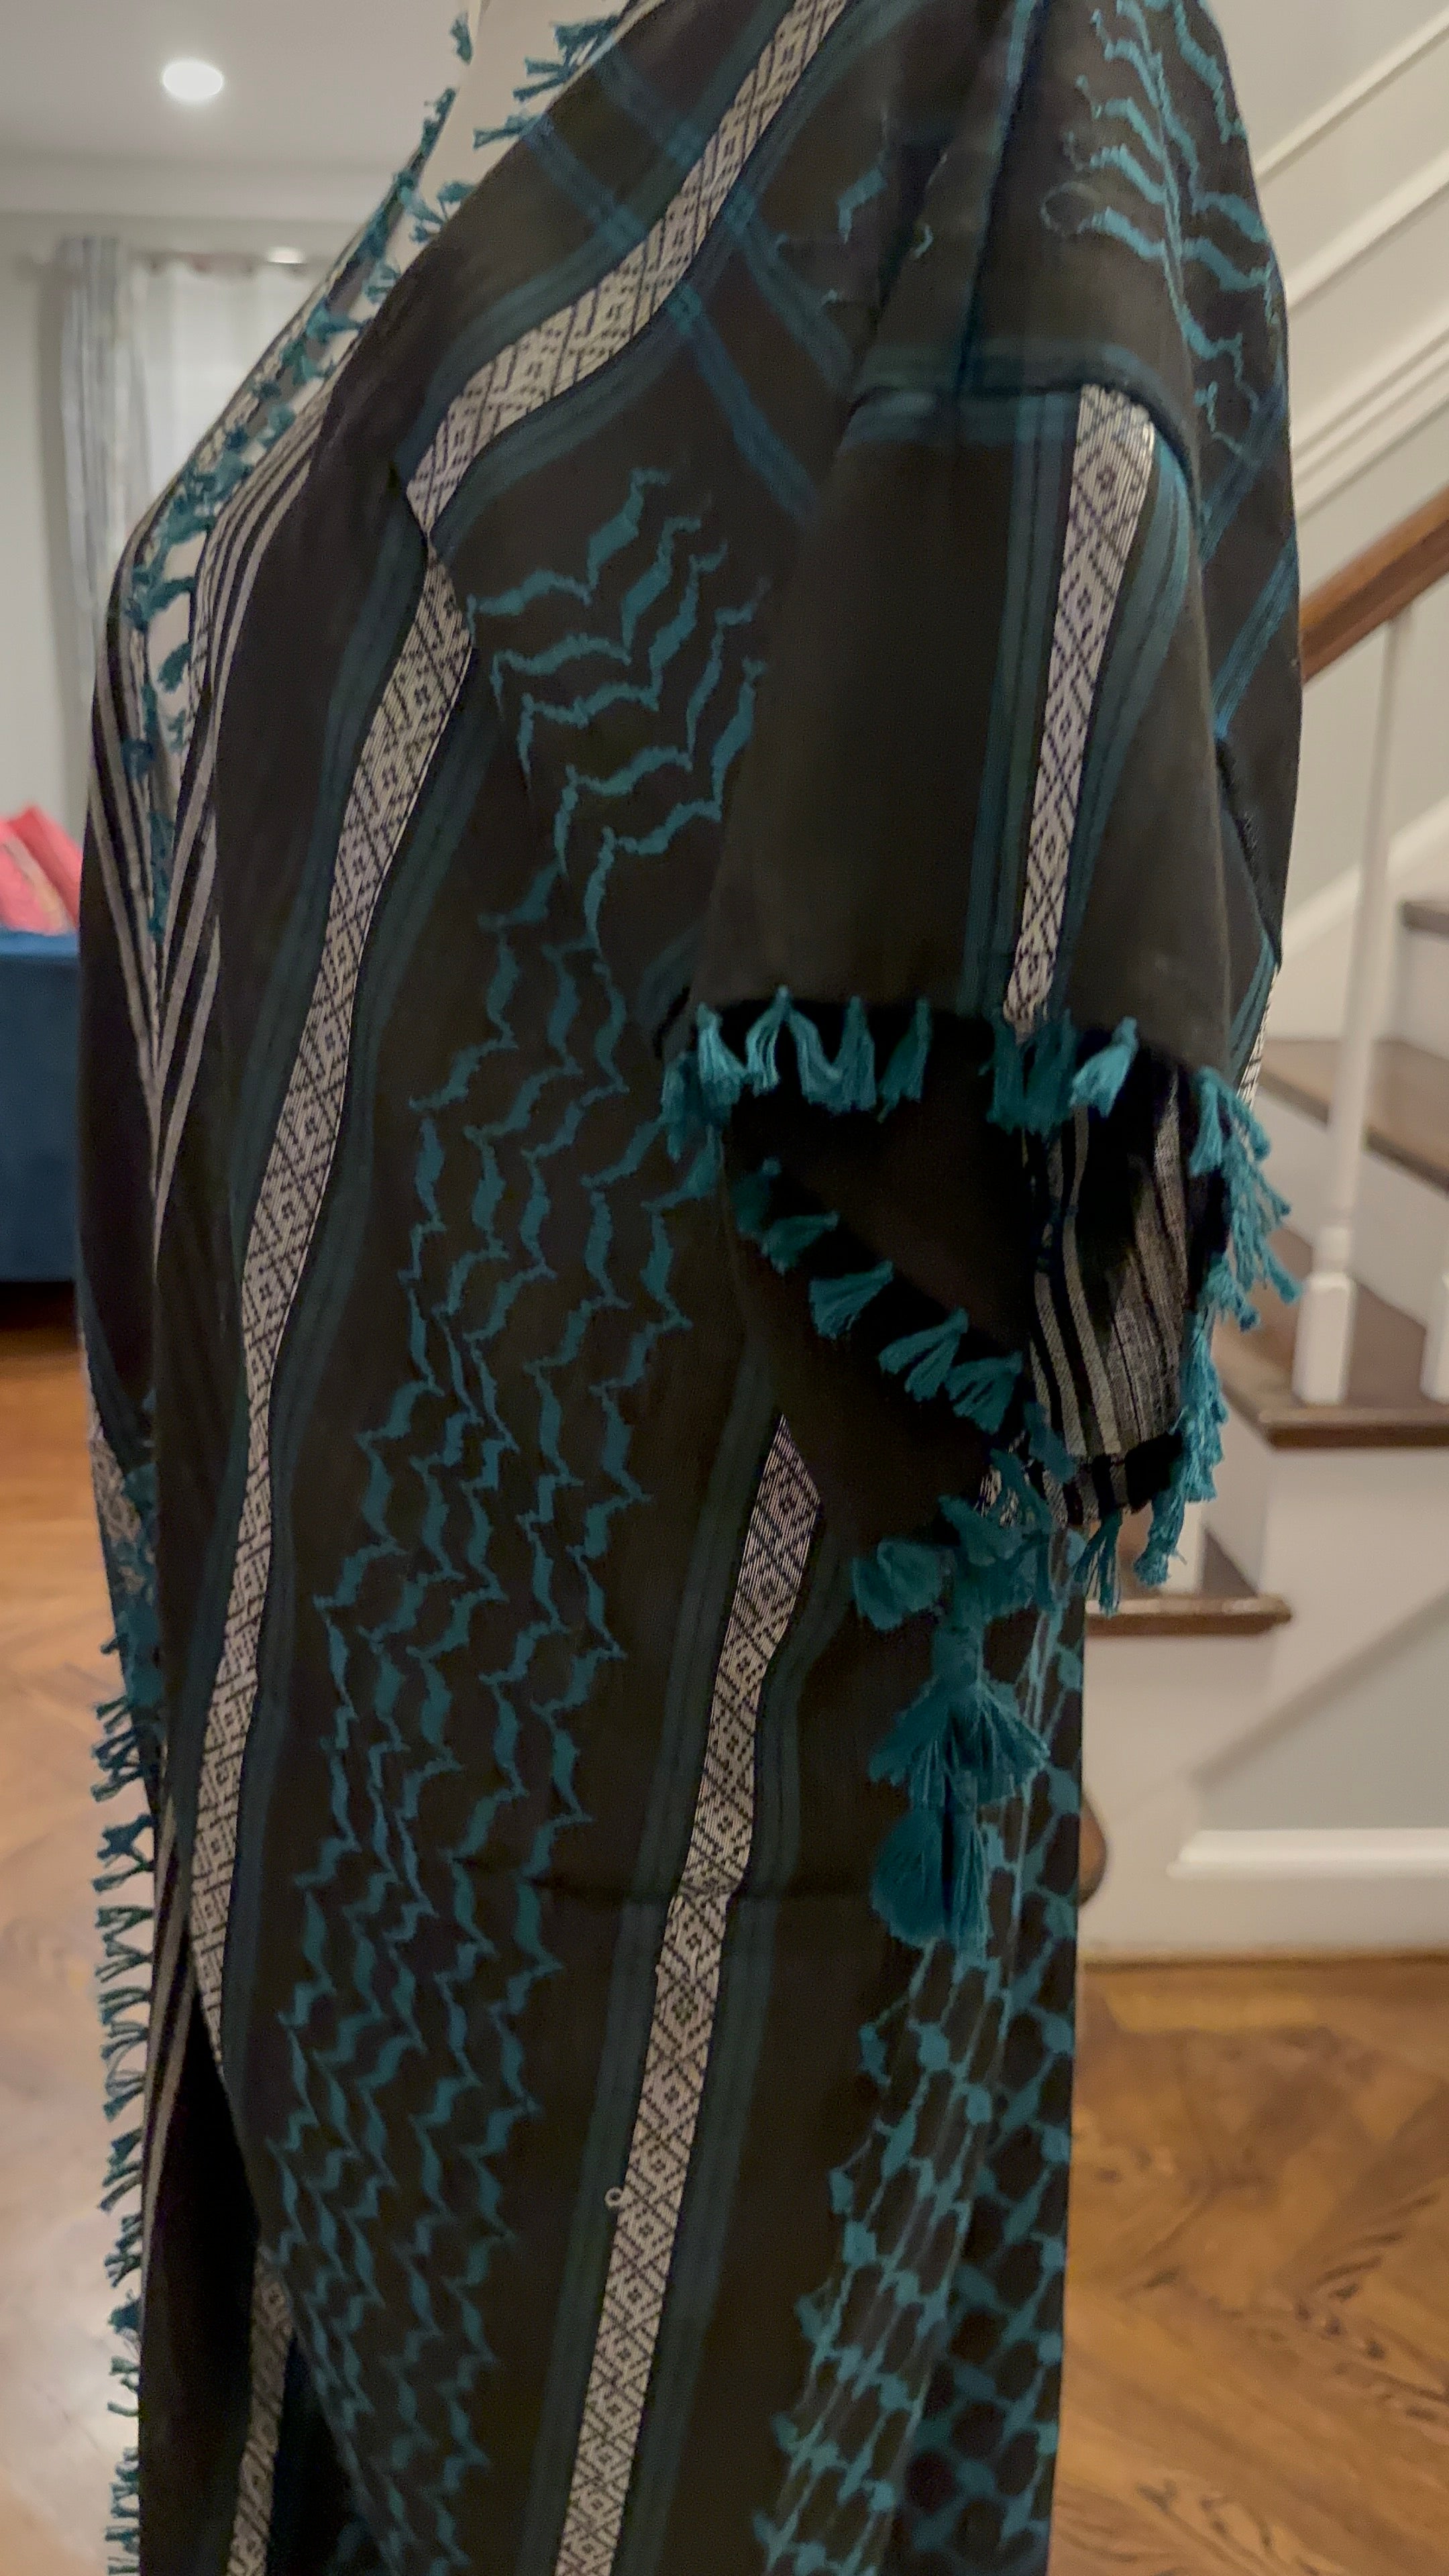 Gray, Silver and Teal  open keffiyeh caftan